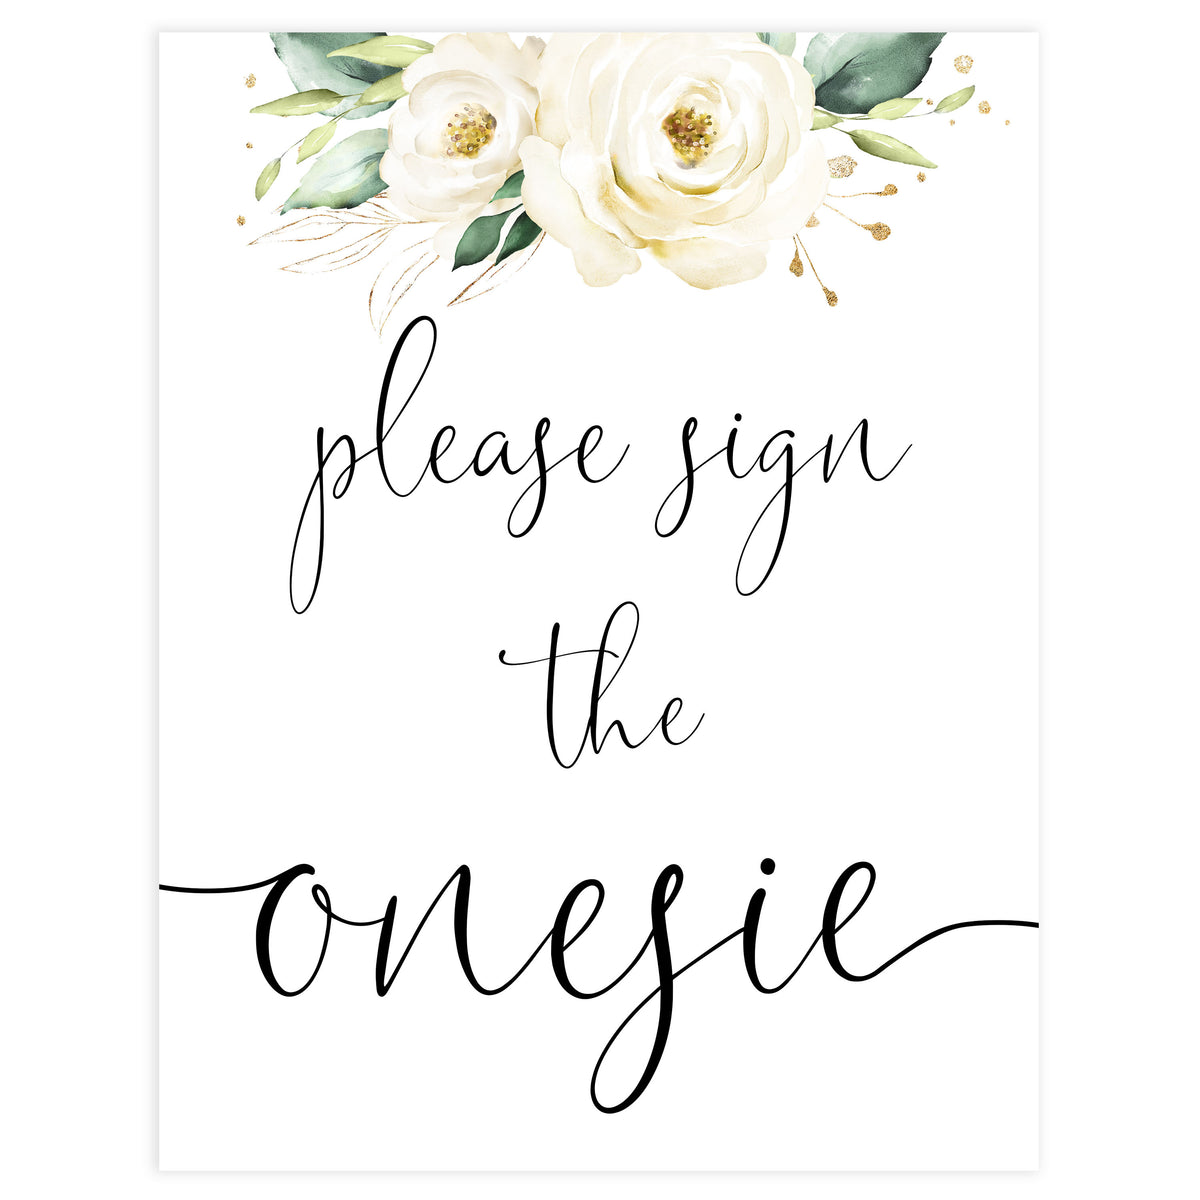 sign the onesie game, Printable baby shower games, shite floral baby games, baby shower games, fun baby shower ideas, top baby shower ideas, floral baby shower, baby shower games, fun floral baby shower ideas